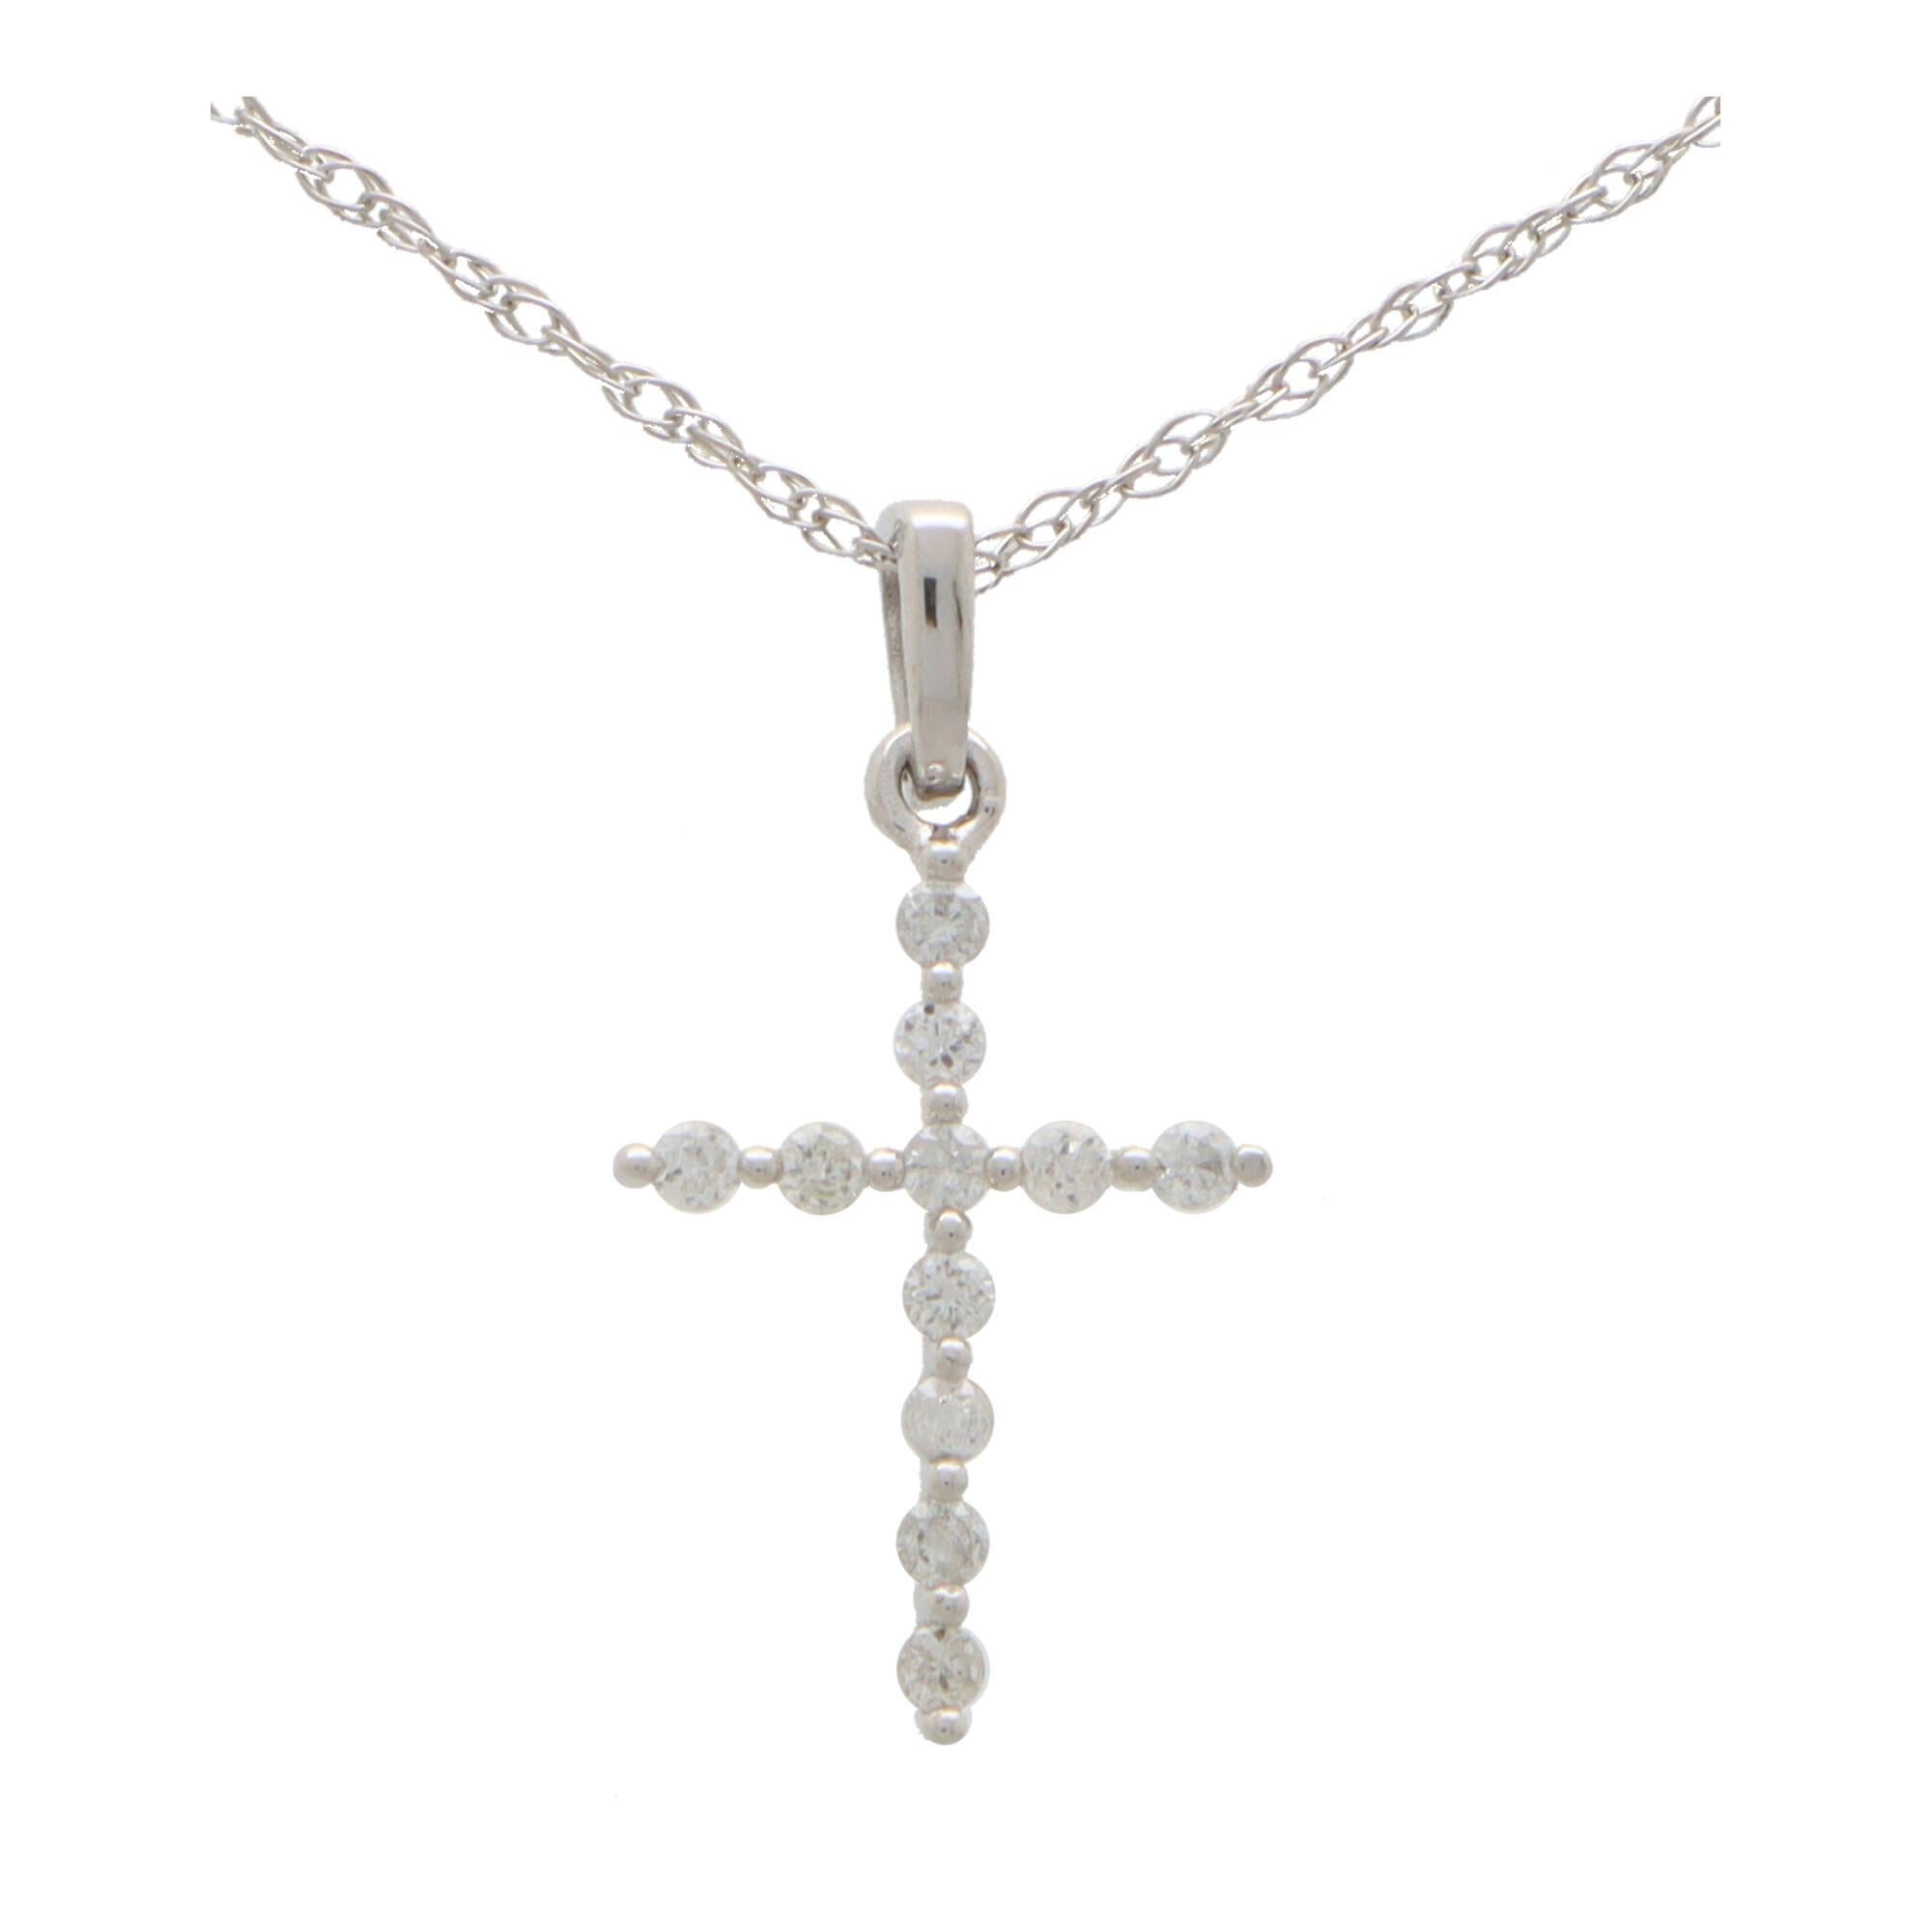 A dainty diamond cross pendant necklace set in 14k white gold.

The pendant depicts a cross motif and is claw set with exactly 11 round brilliant cut diamonds. The cross hangs from a white gold bail and hangs from a fine 18-inch white gold trace